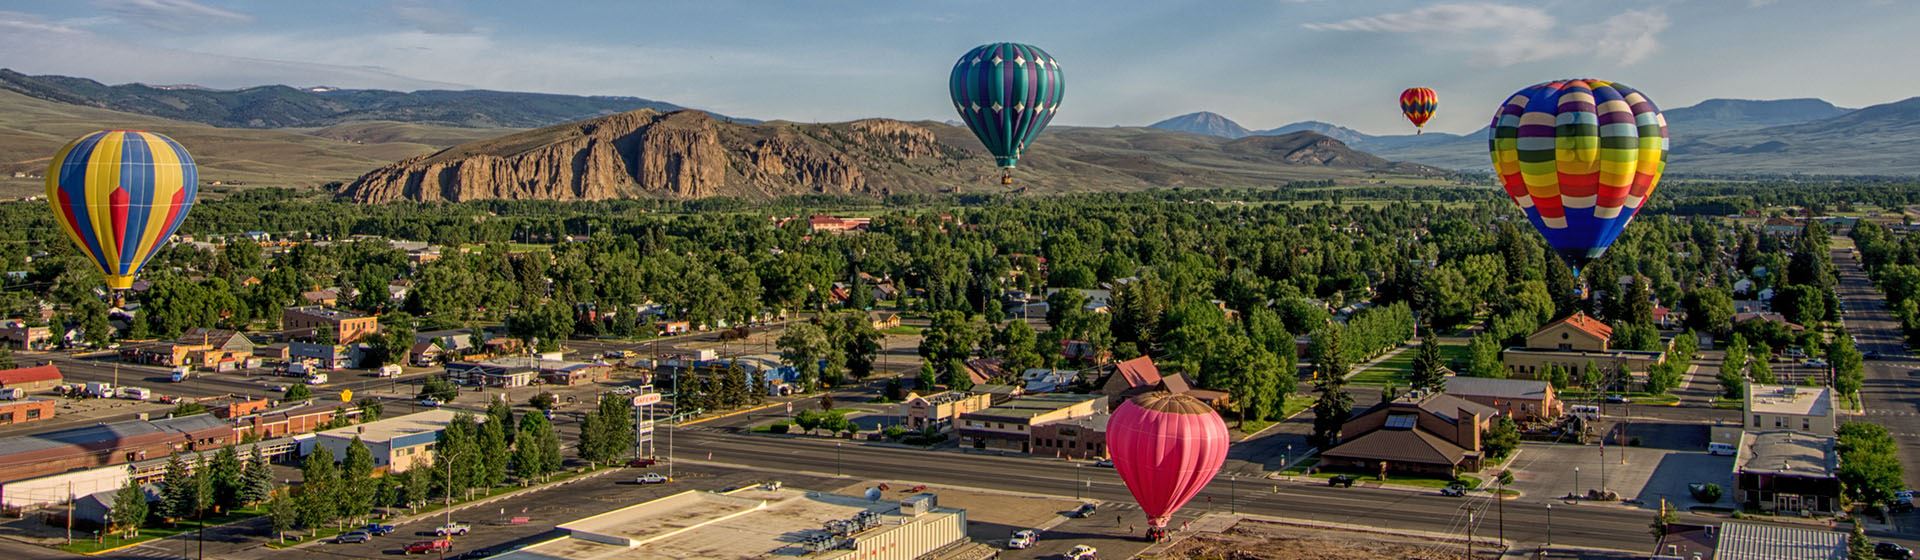 Hot air balloons in the sky over a town with mountains in the back ground